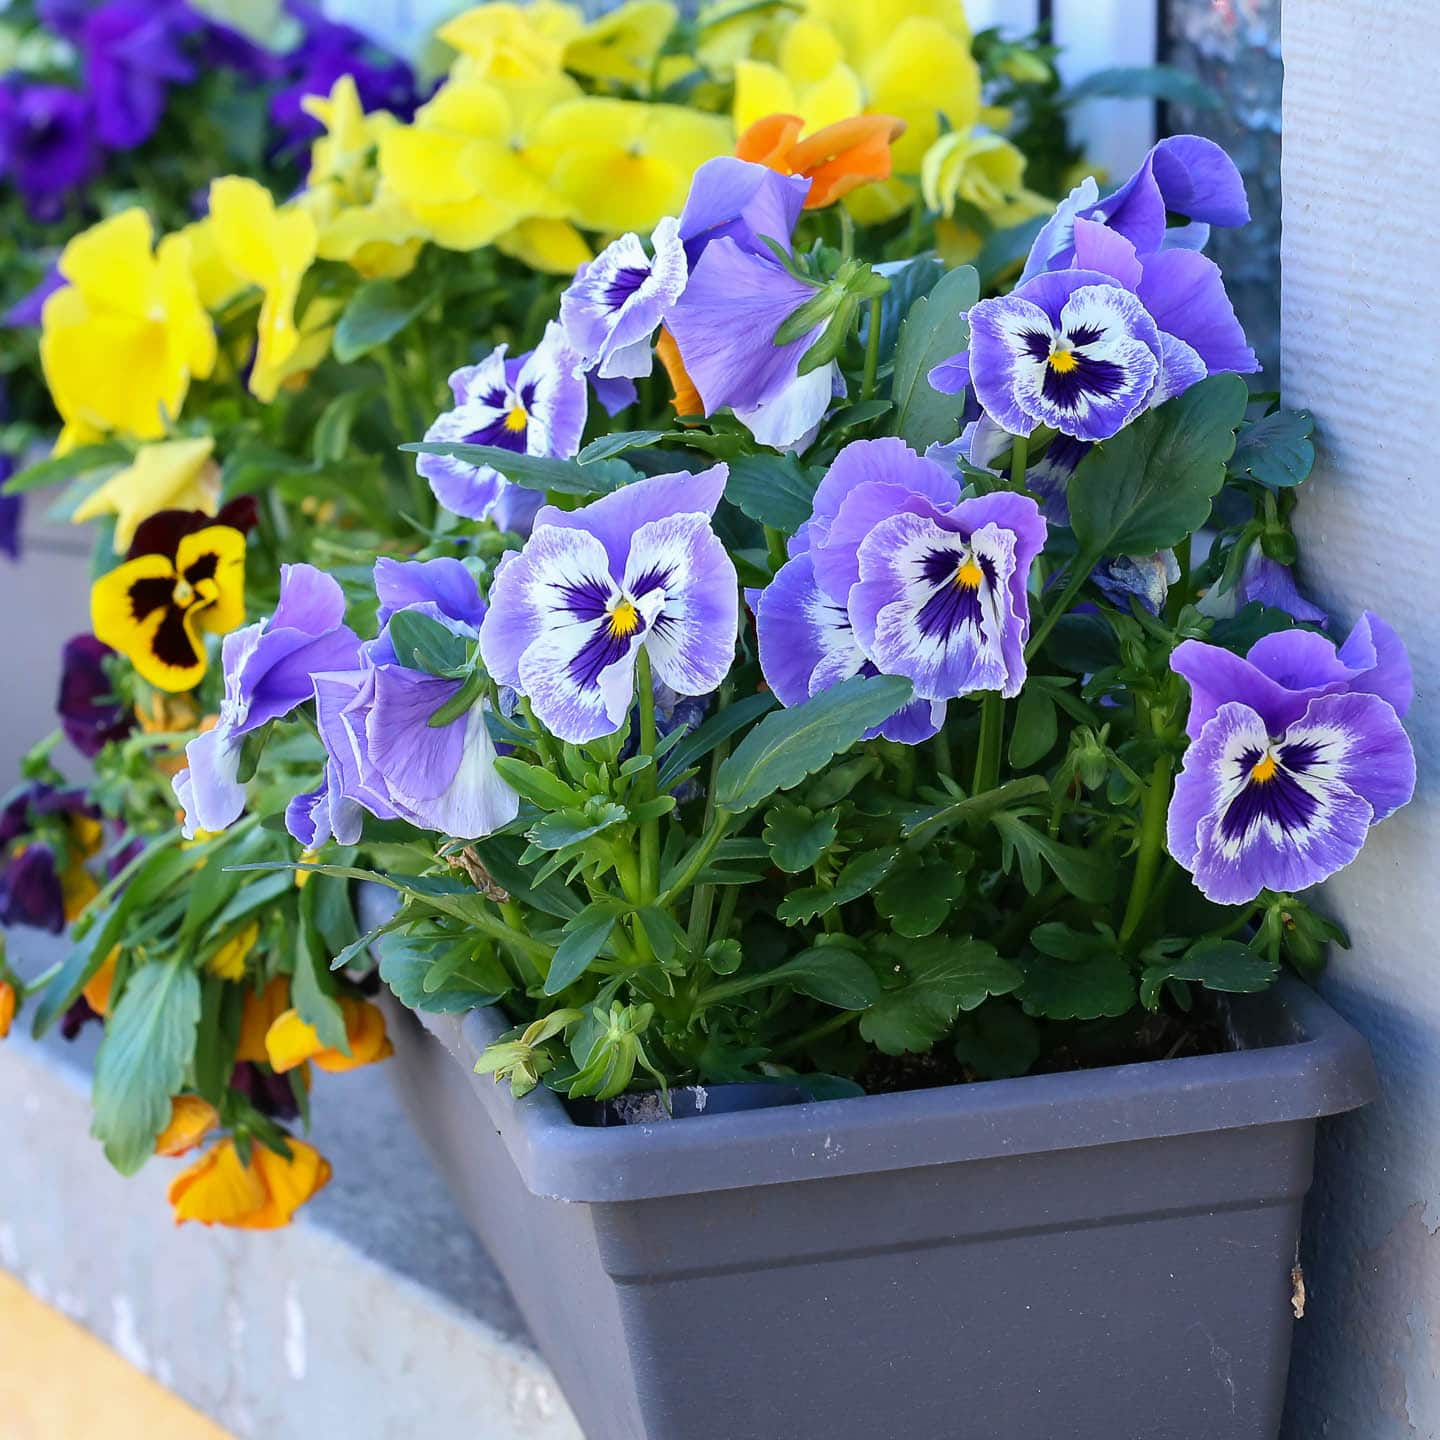 Pansies in a window box